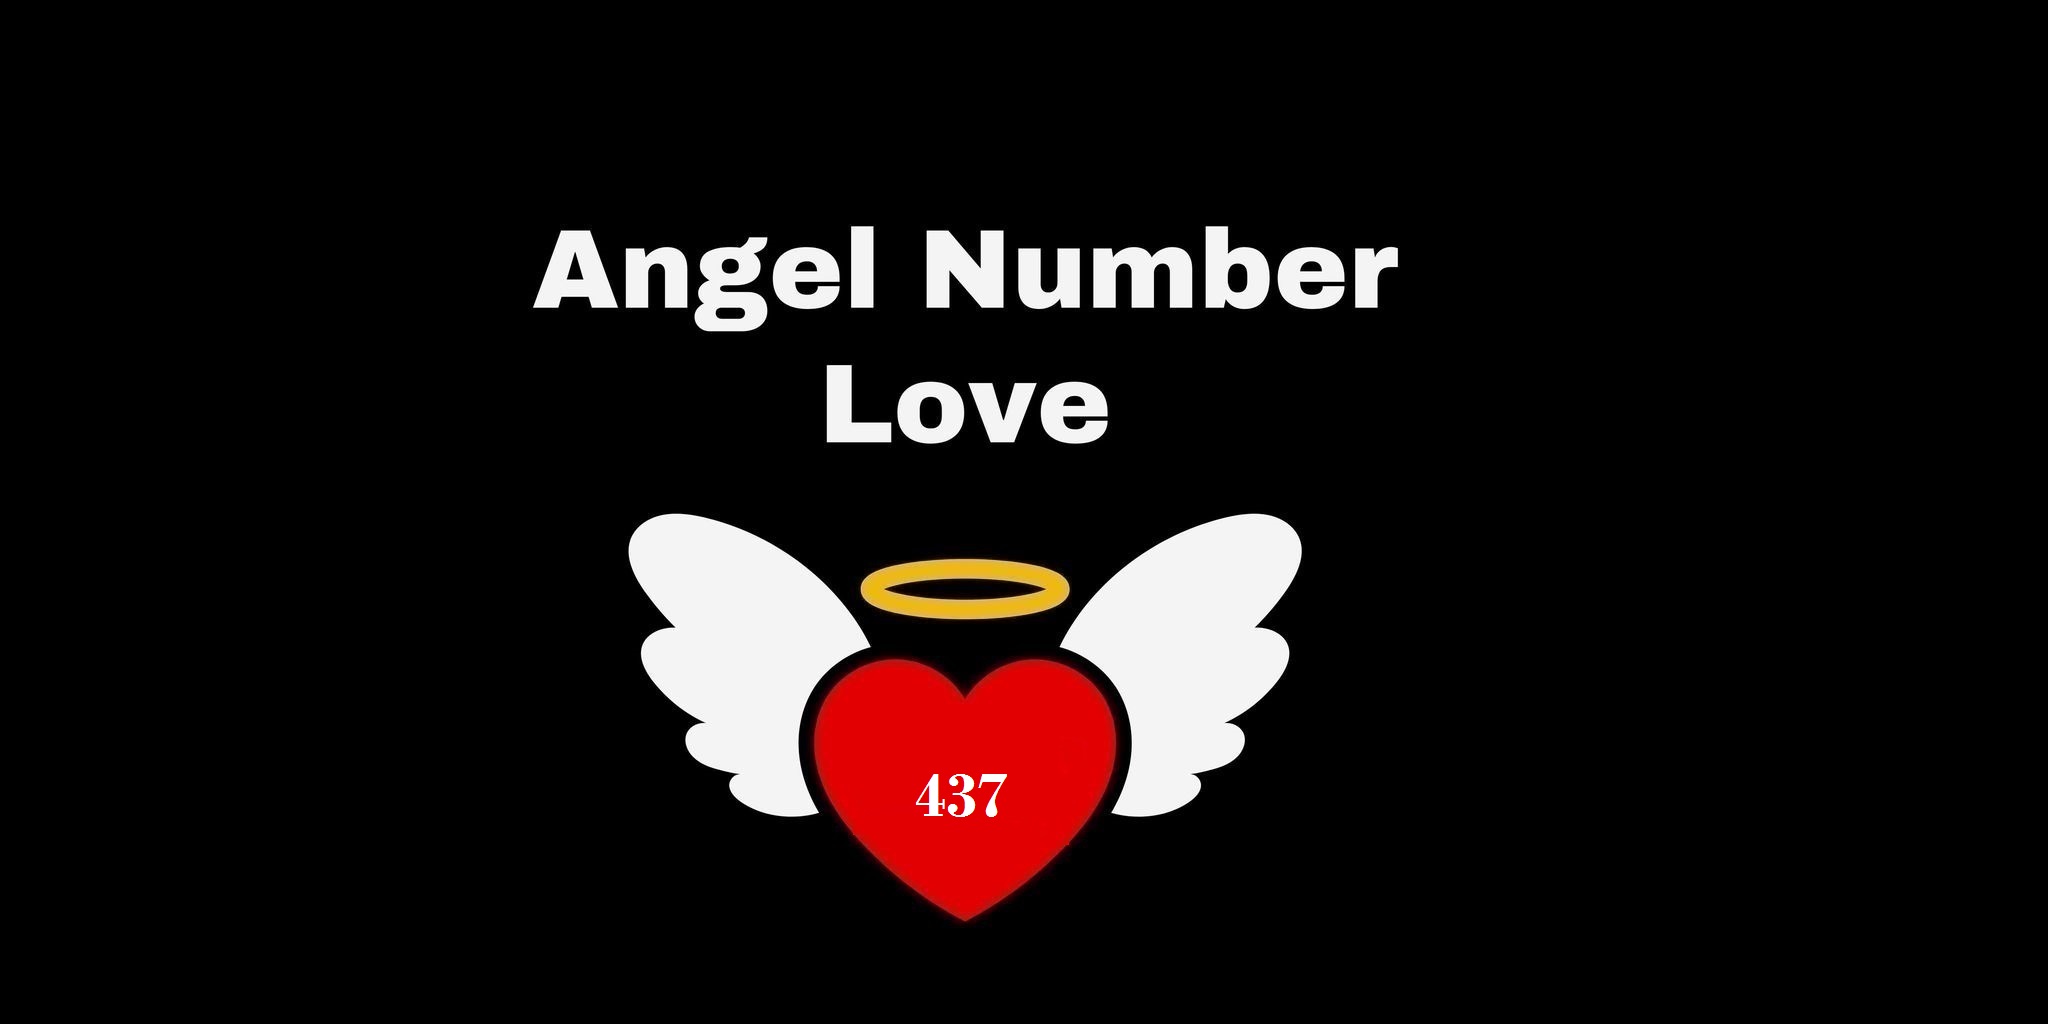 437 Angel Number Meaning In Love